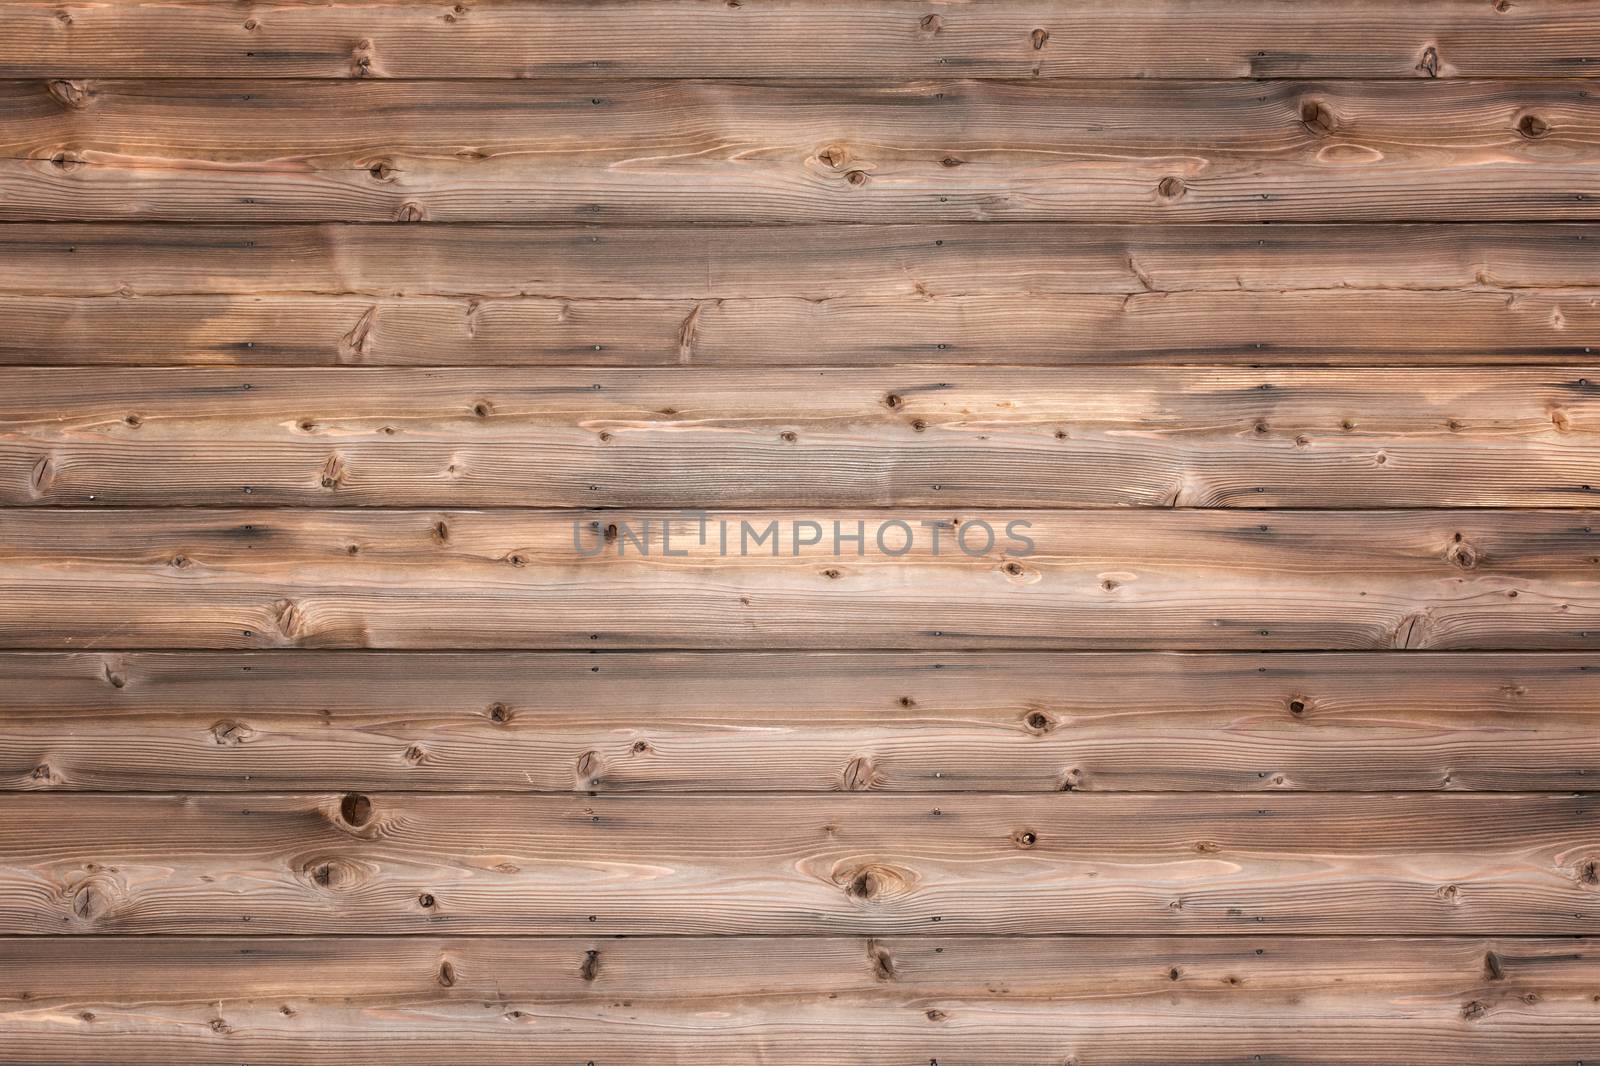 Background texture of wooden with good detail.